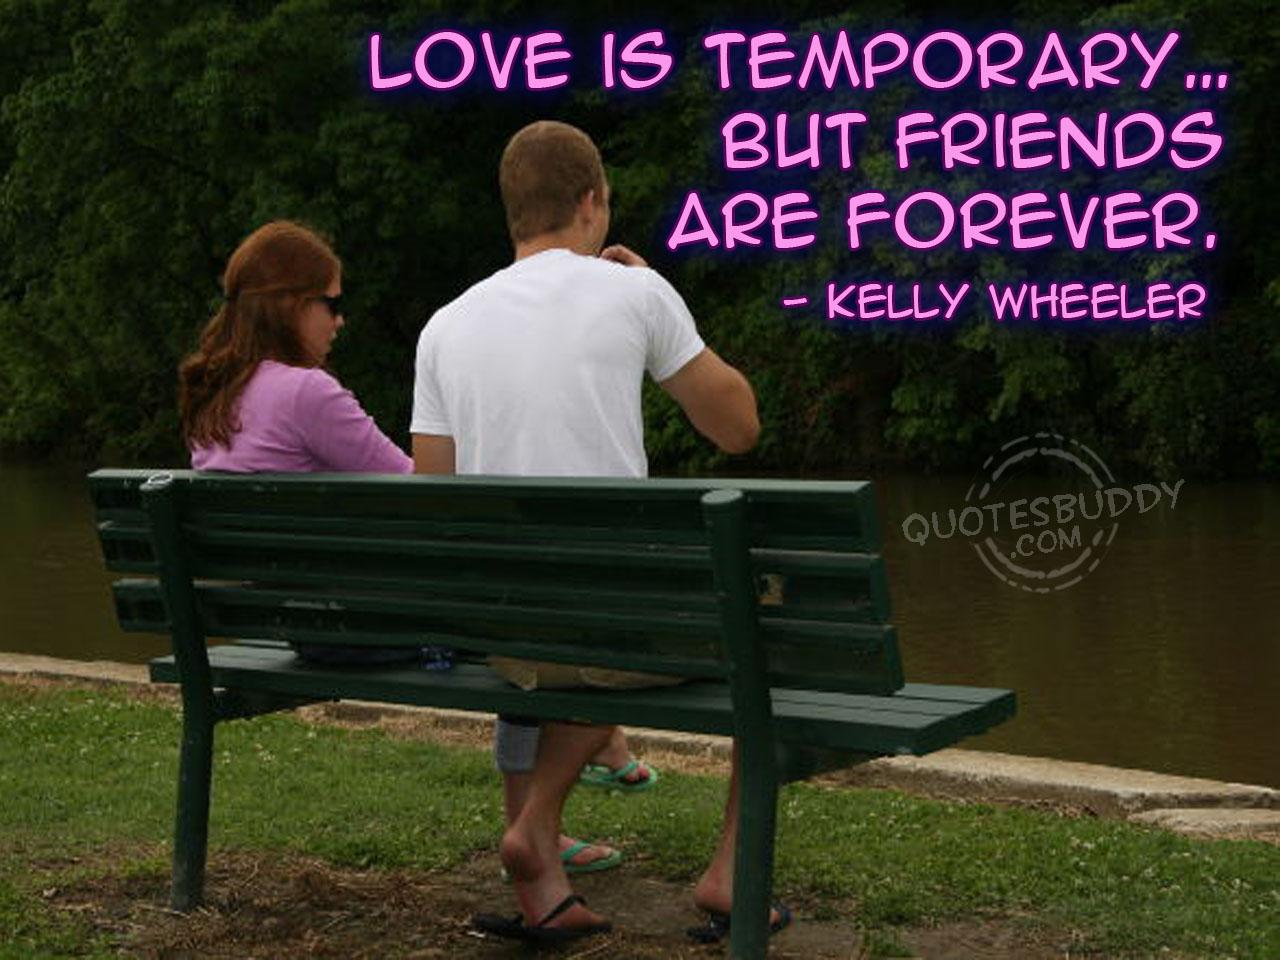 Love Is Temporary But Friends Are Forever ~ Friendship - Best Friend Friendship Is Better Than Love Quotes - HD Wallpaper 